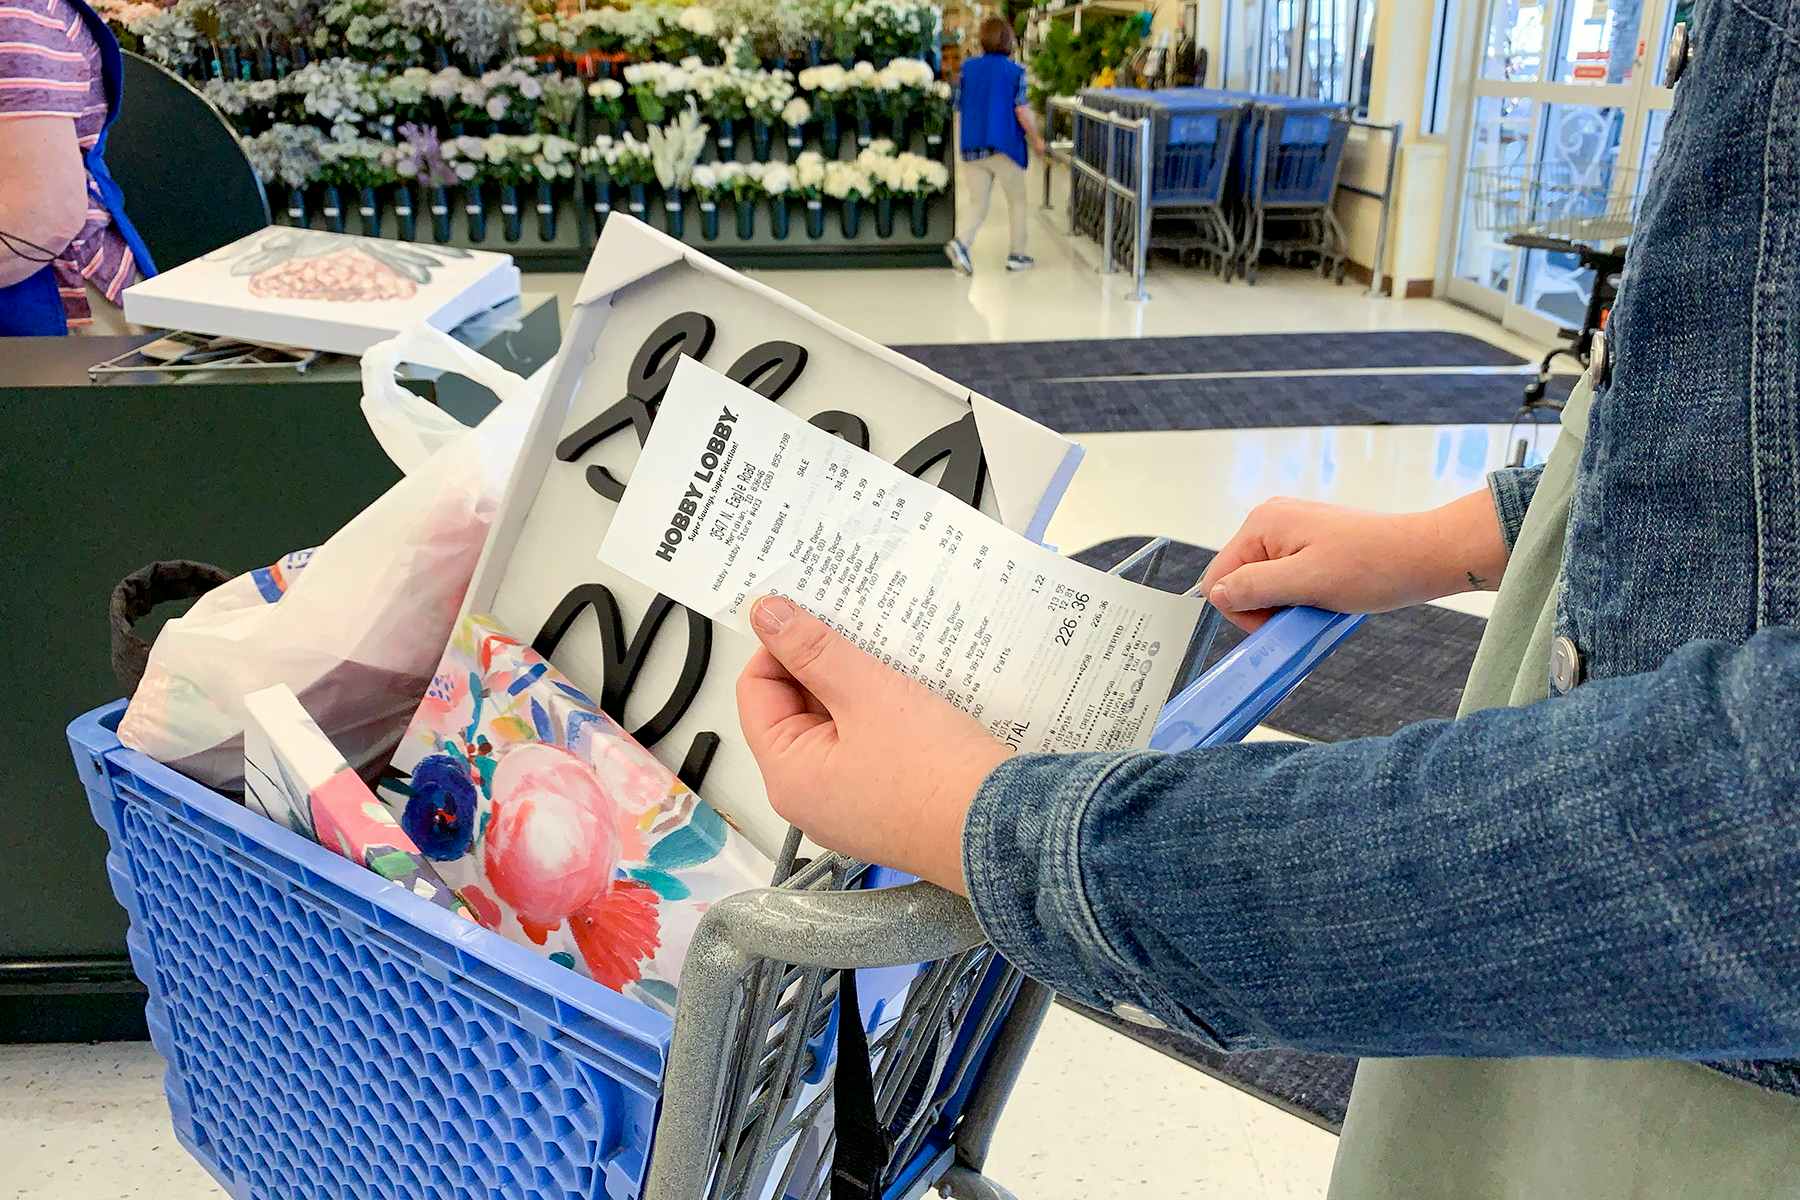 A woman holding a receipt in front of a basket filled with products at the return register.